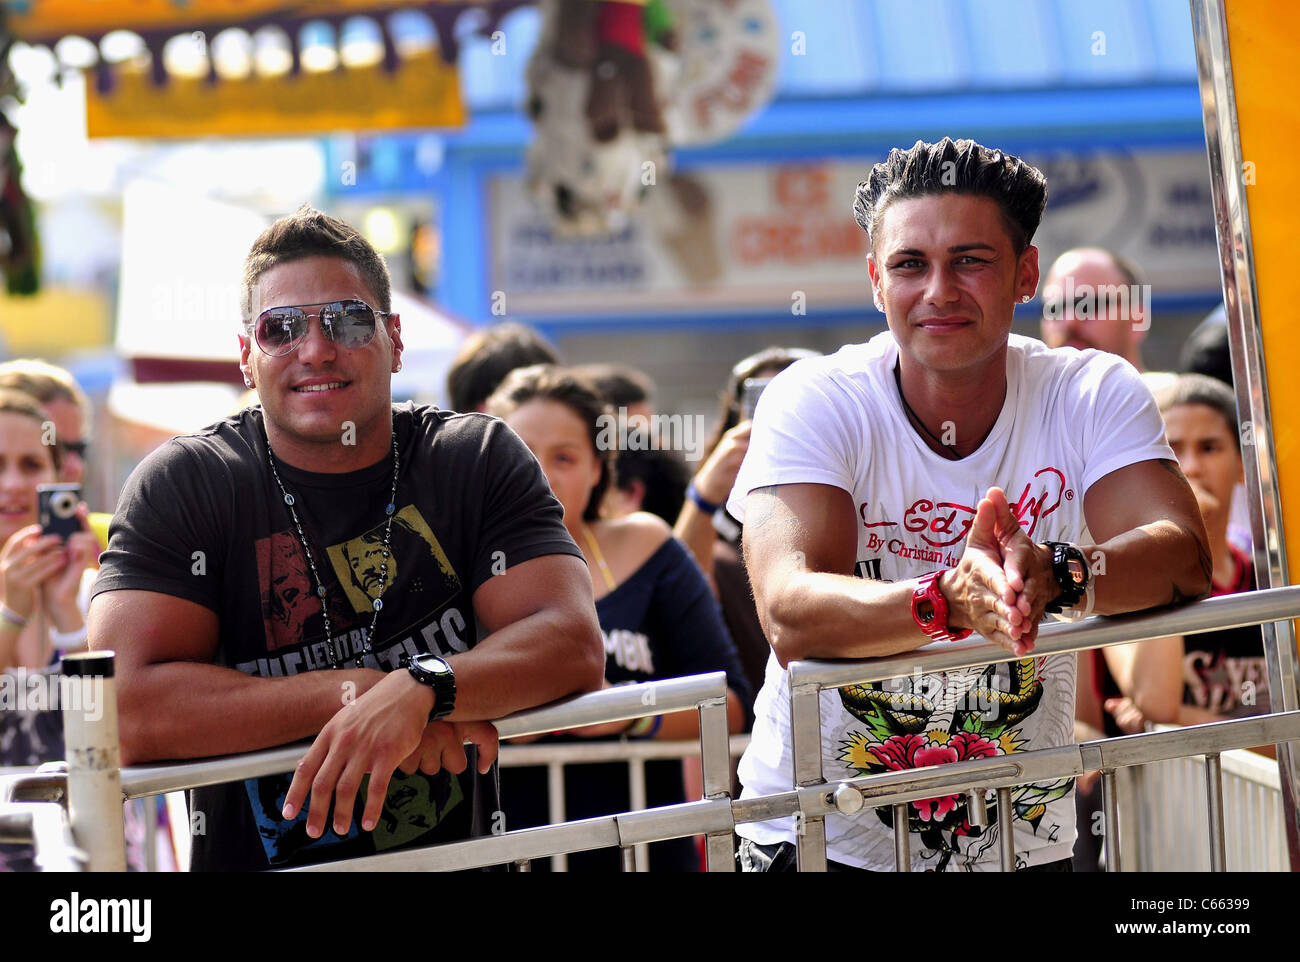 Ronnie Ortiz-Magro, Paul DelVecchio,( DJ Pauly D) on the boardwalk out and about for JERSEY SHORE Season Two Celebrity Candids - TUE, , Seaside Heights, NJ August 17, 2010. Photo By: William D. Bird/Everett Collection Stock Photo